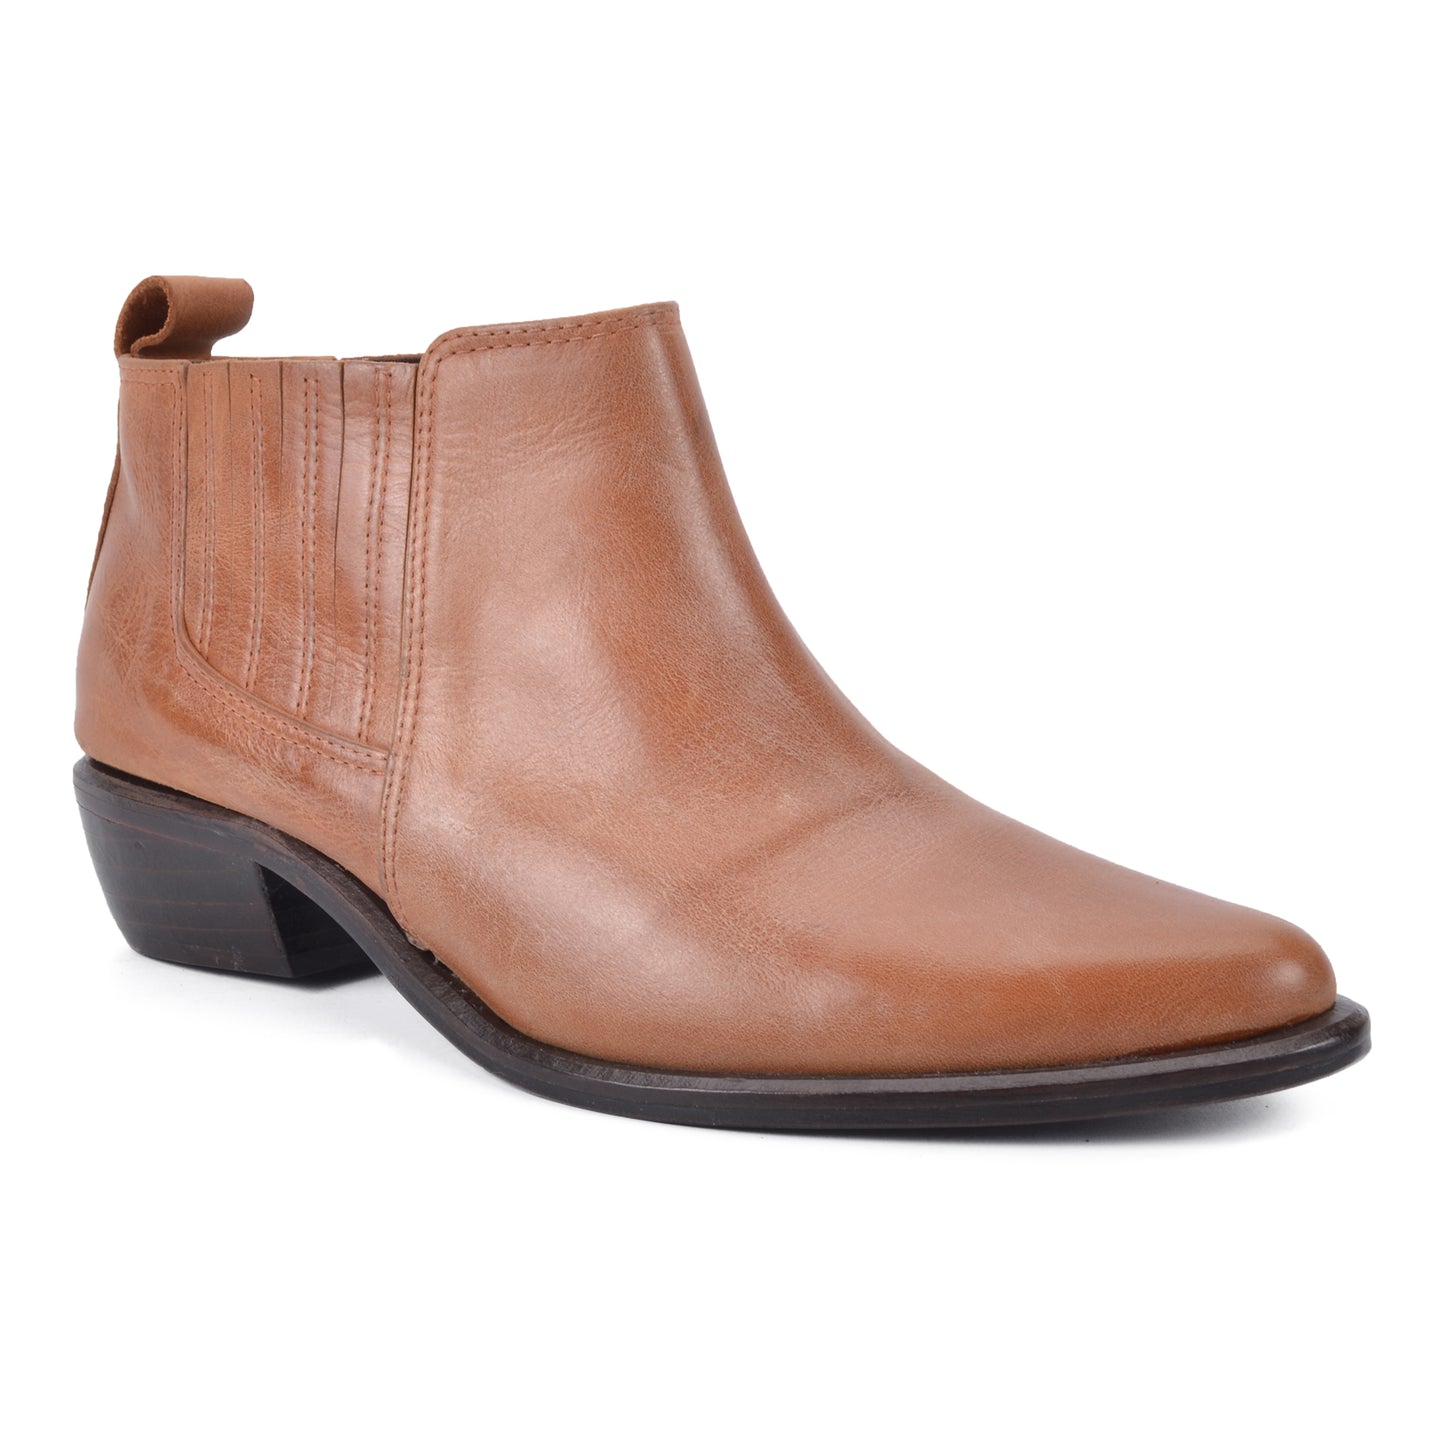 Monet Tan | Leather booties